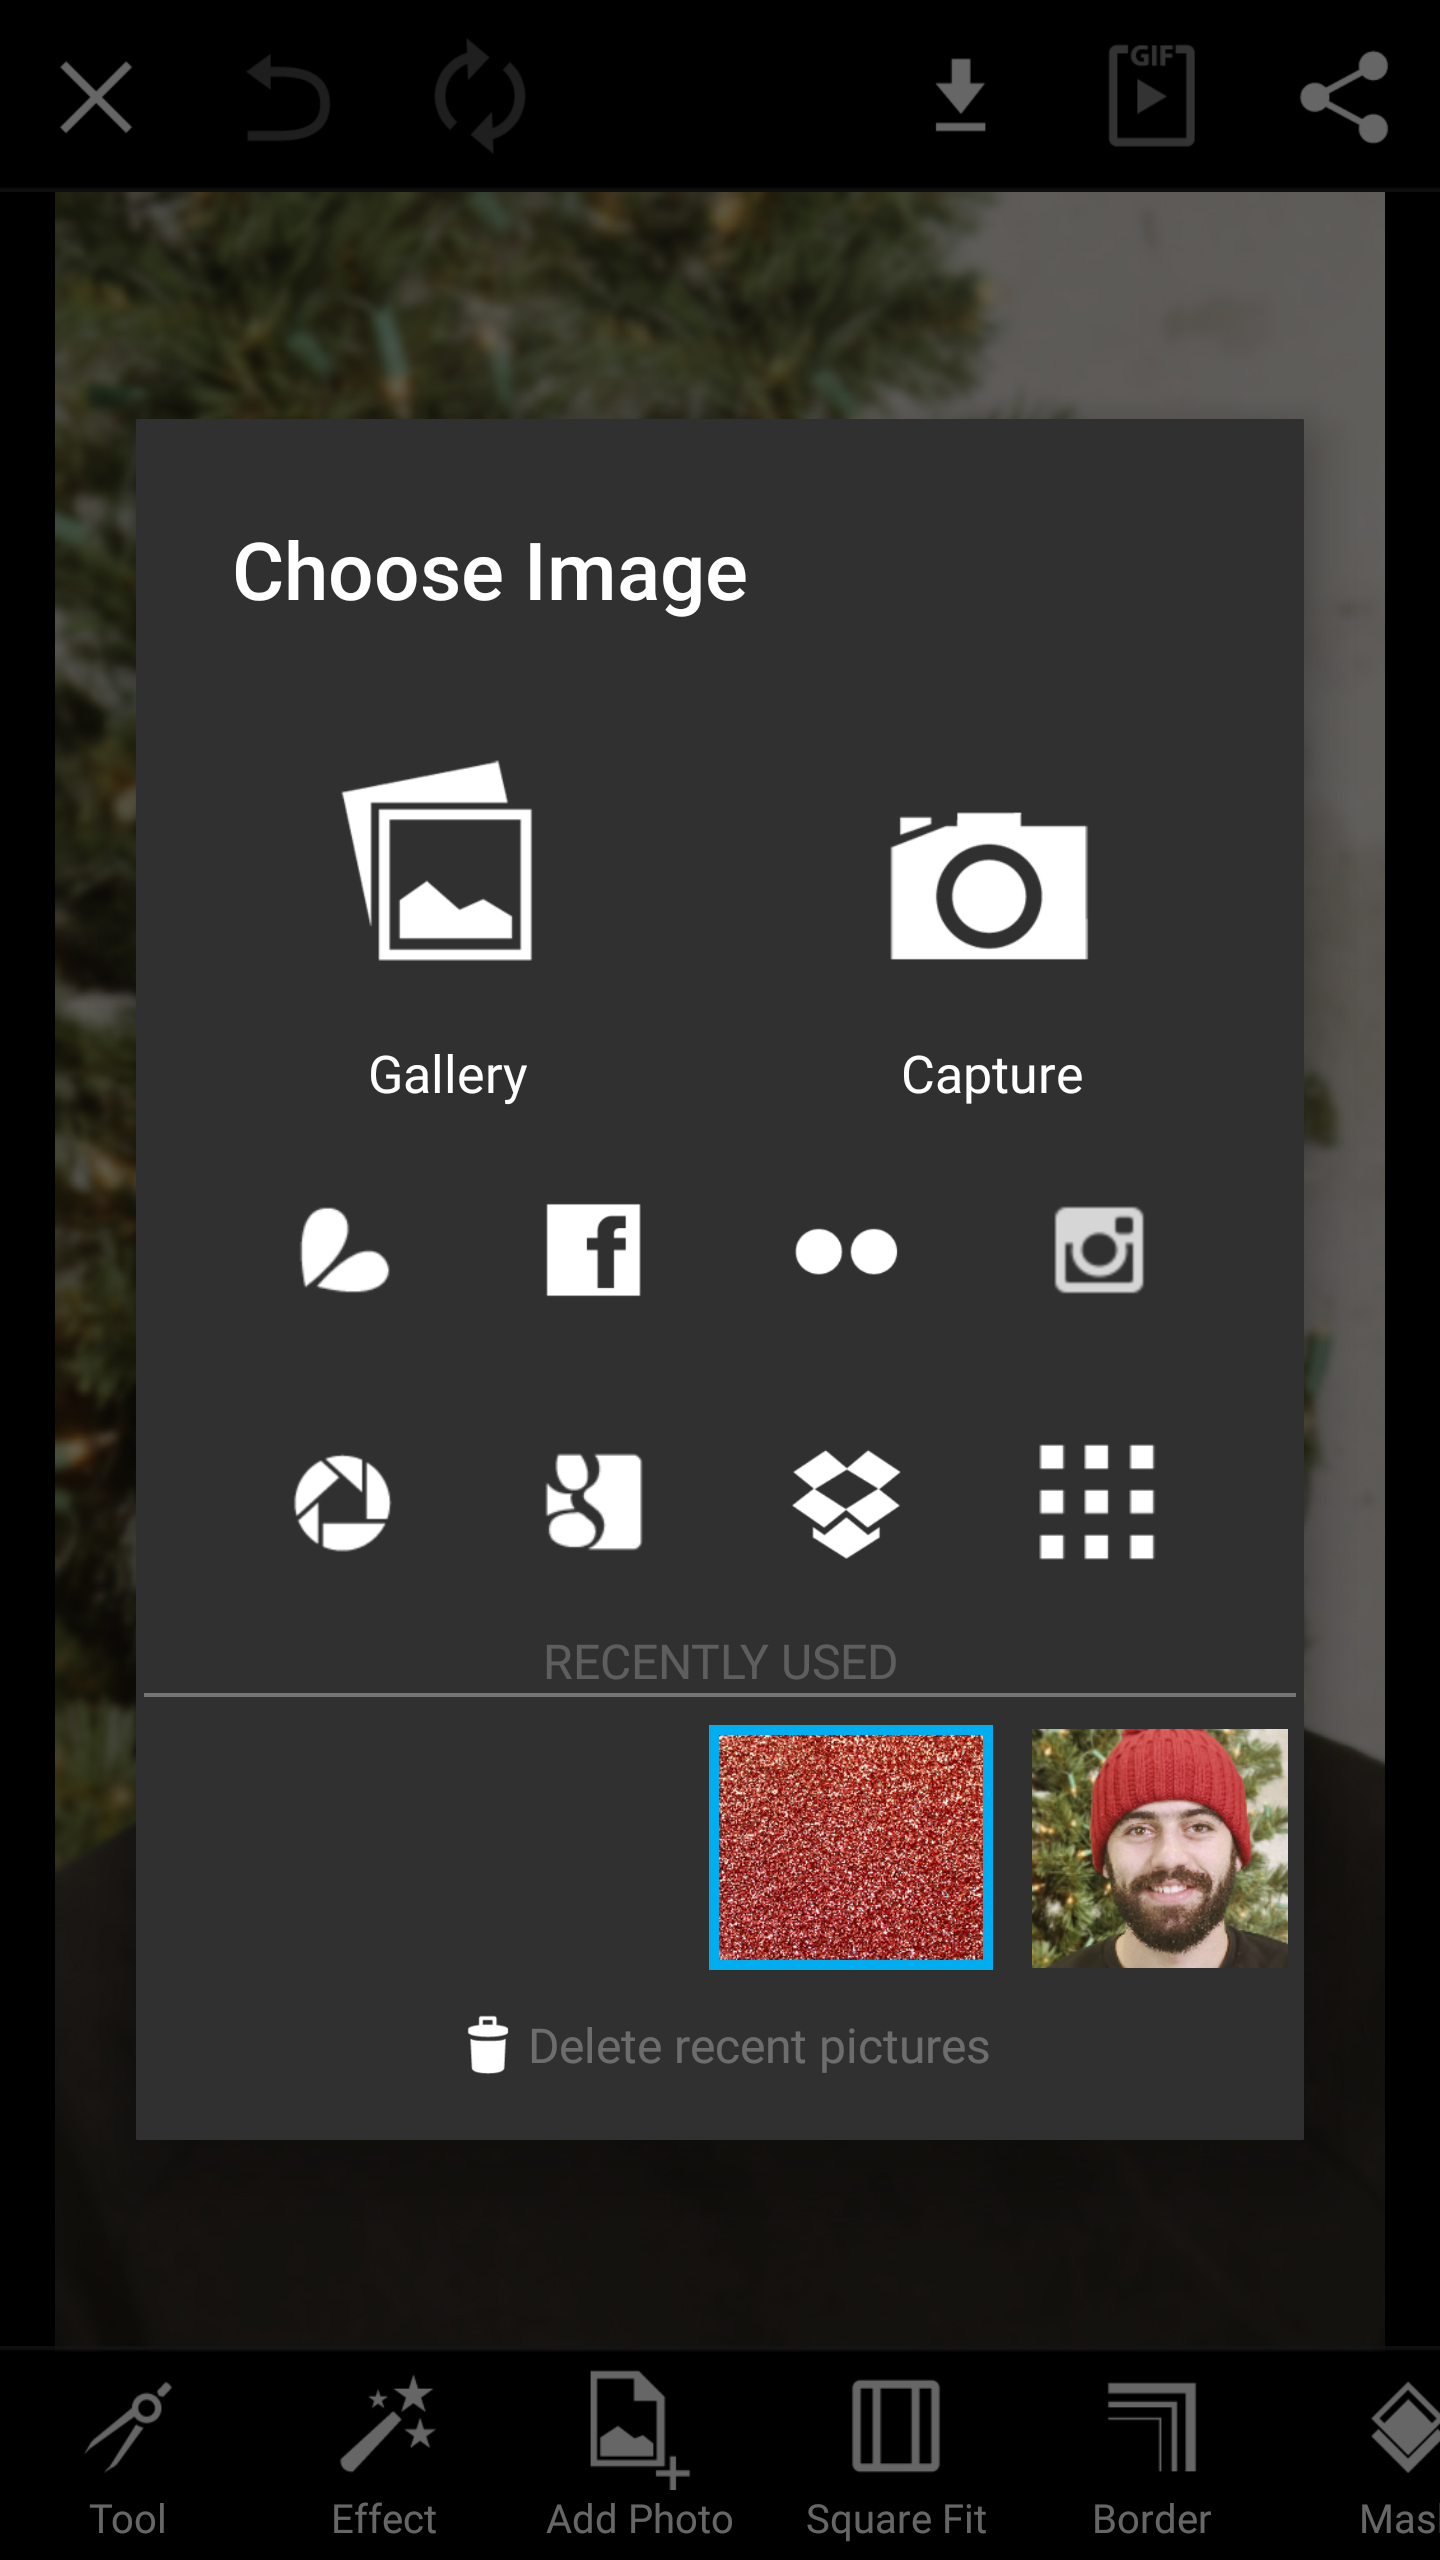 Choose a photo to edit